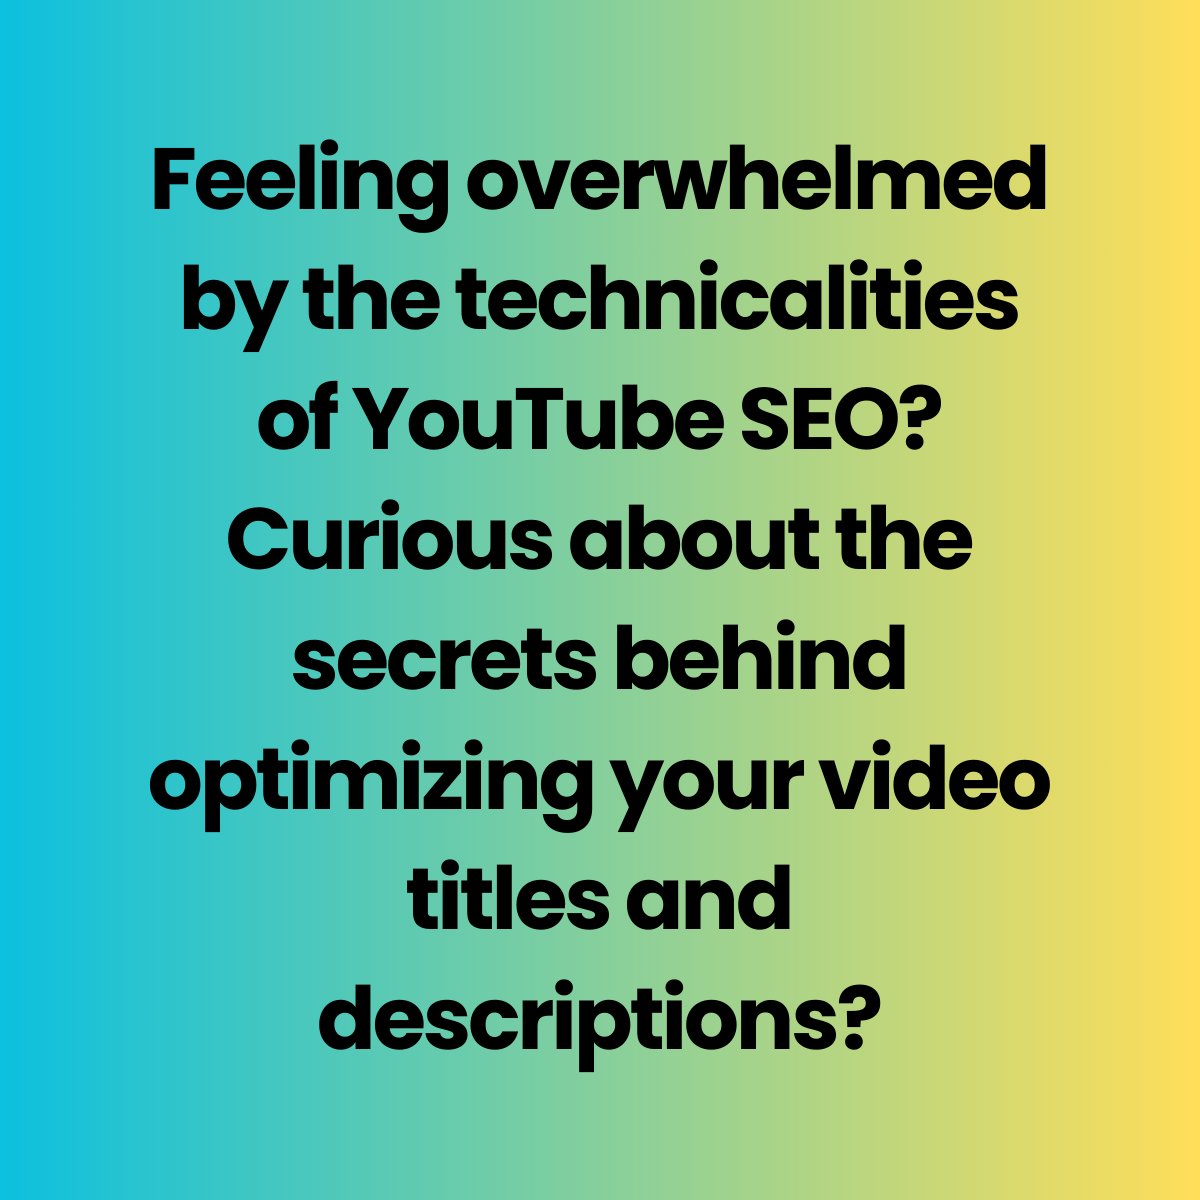 Feeling overwhelmed by the technicalities of YouTube SEO? Curious about the secrets behind optimizing your video titles and descriptions?

#videooptimization #digitalmarketing #youtubechannel #youtubevideos #seotips #youtubemarketing #youtubeseo